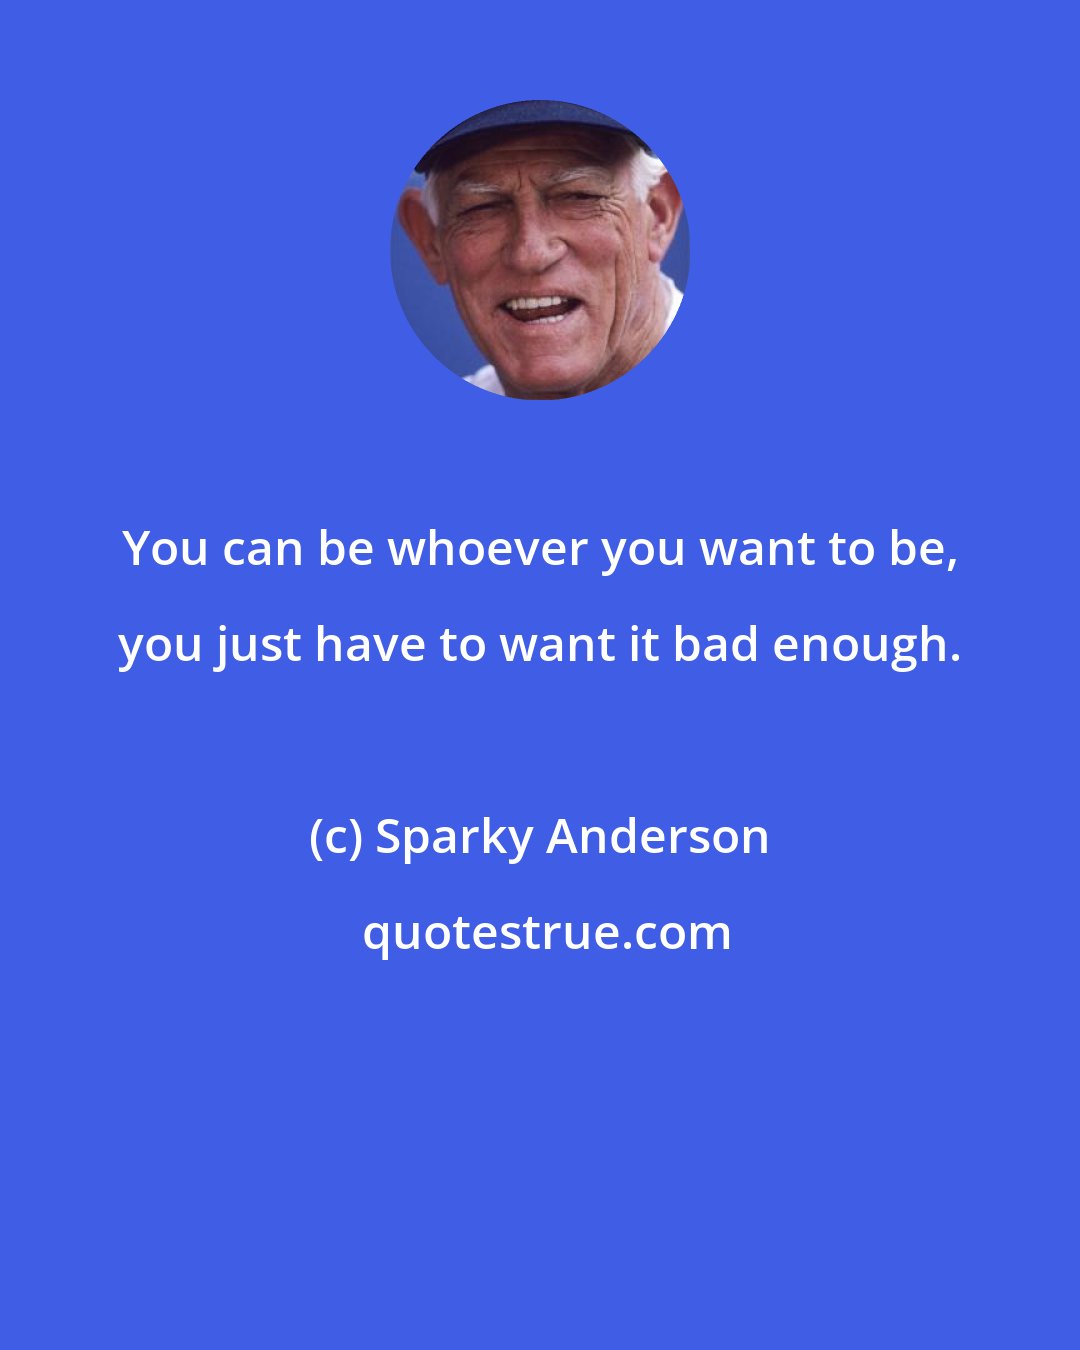 Sparky Anderson: You can be whoever you want to be, you just have to want it bad enough.